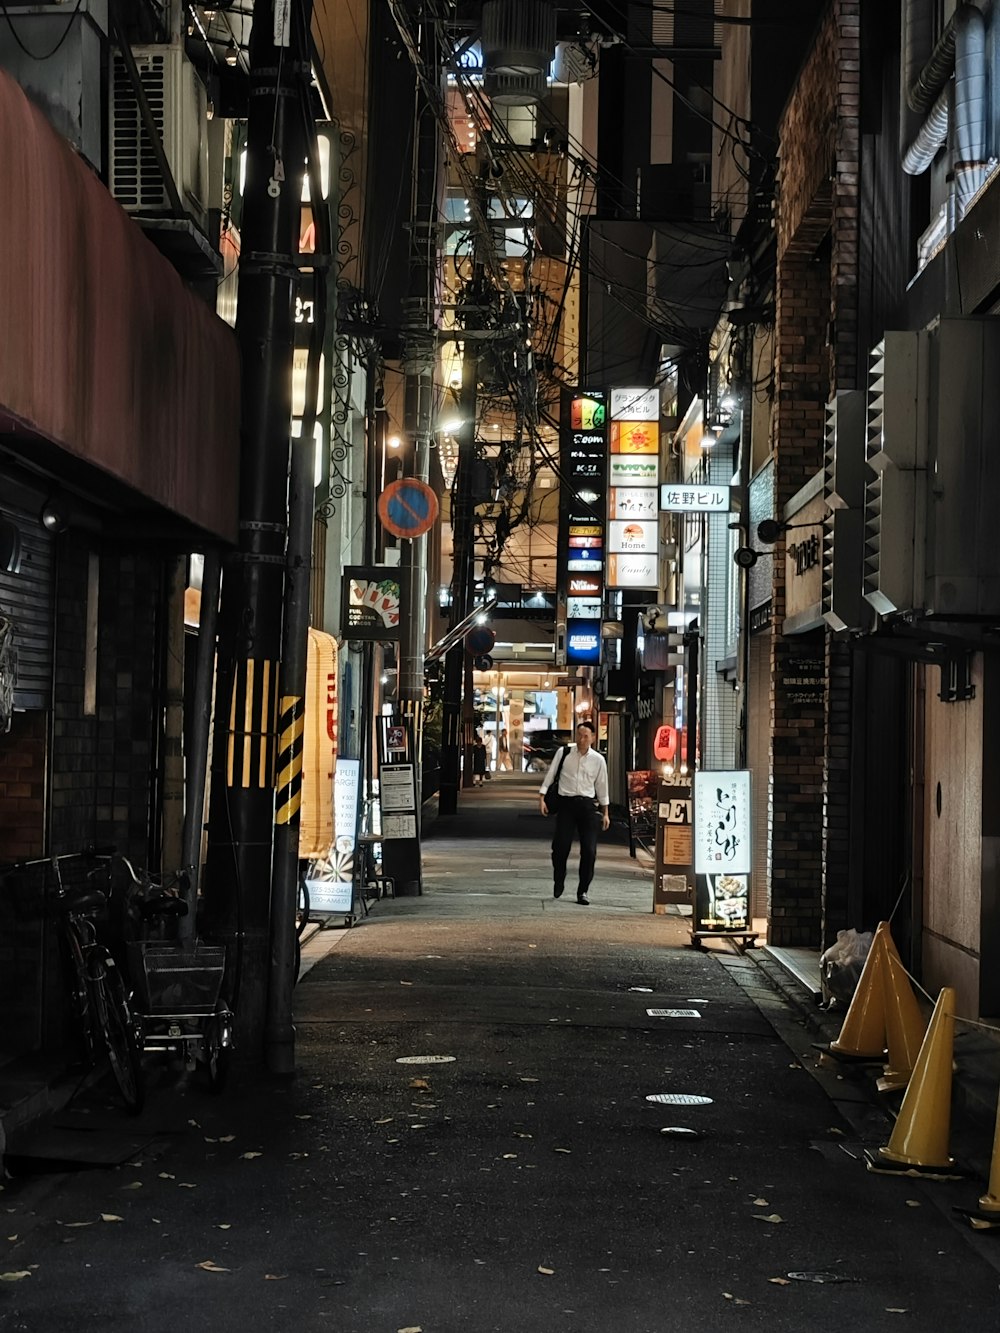 a person walking down an alley way at night